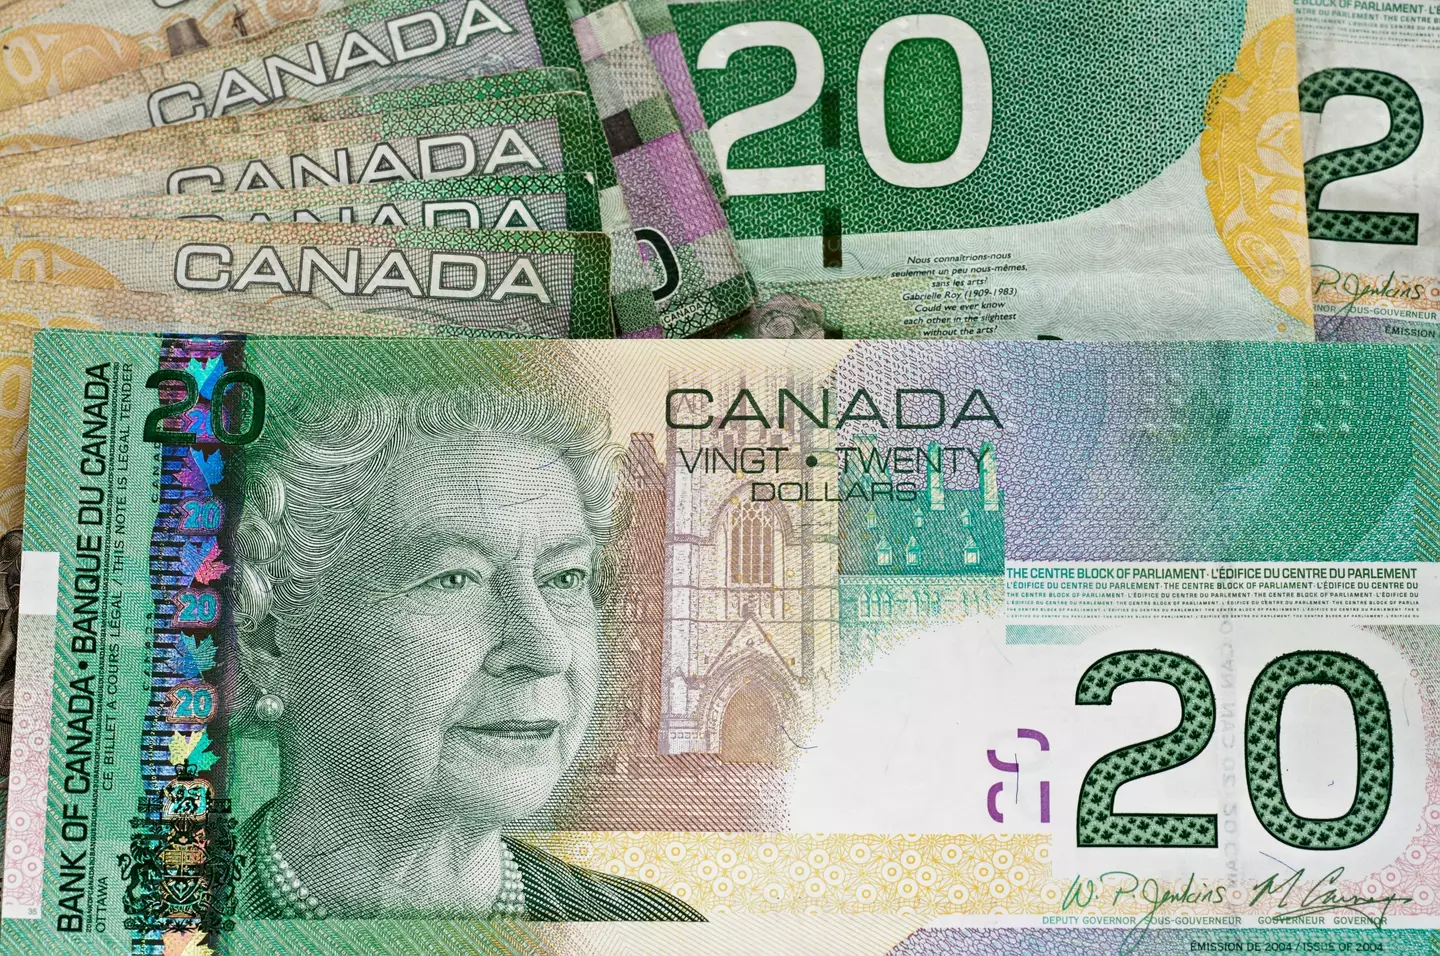 Canada's $20 banknote still features an image of the Queen.